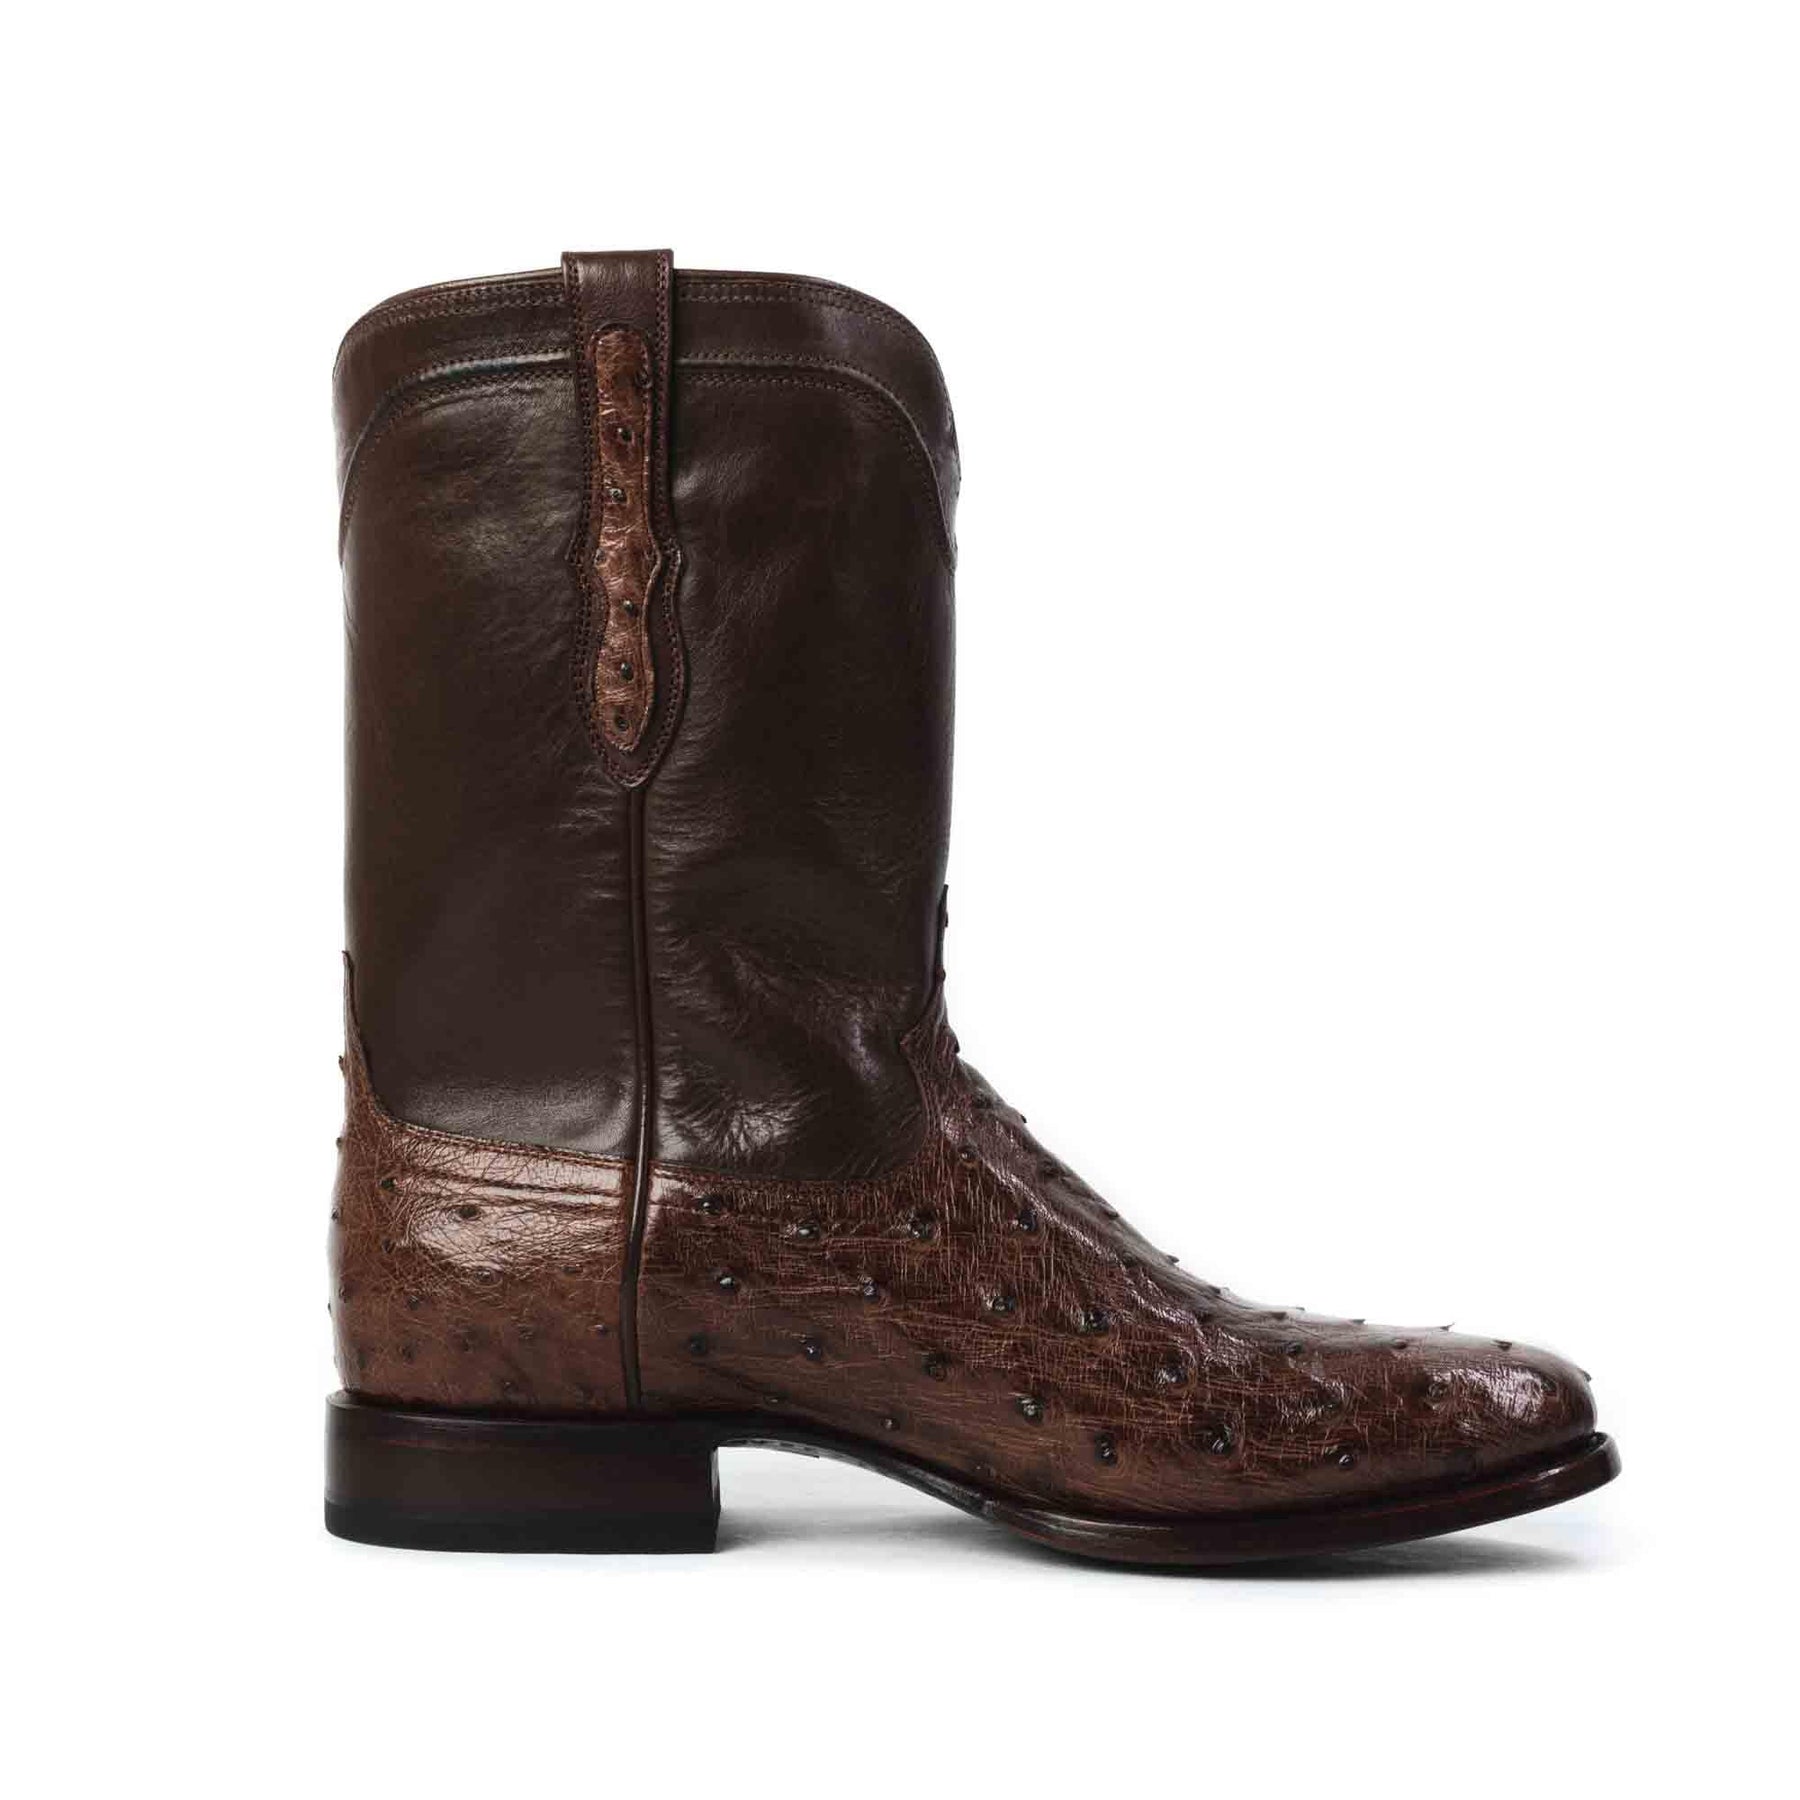 Men's Full-Quill Ostrich Roper Cowboy Boot by RUJO